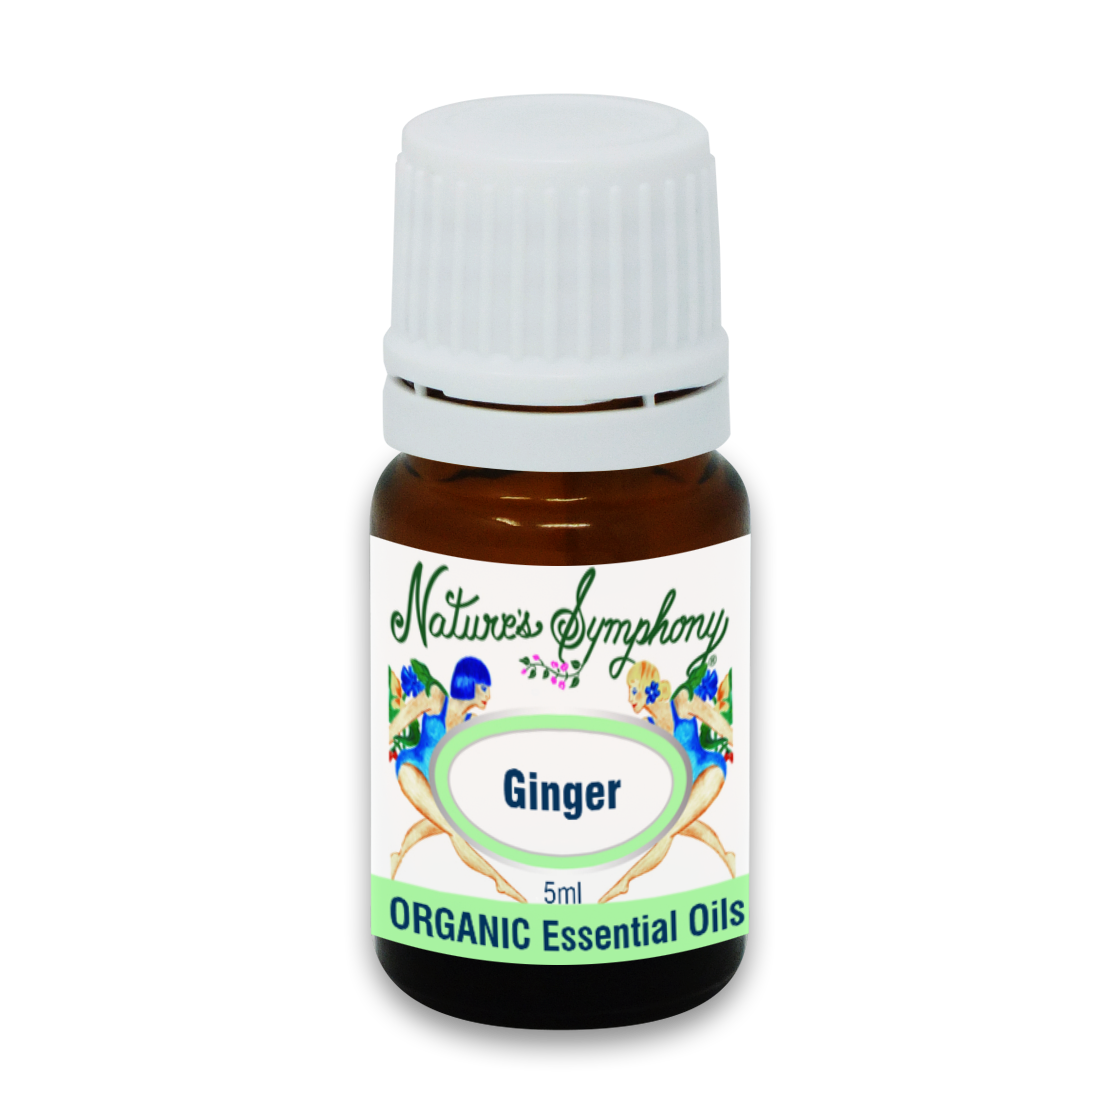 Ginger, Organic/Wildcrafted oil - 5ml